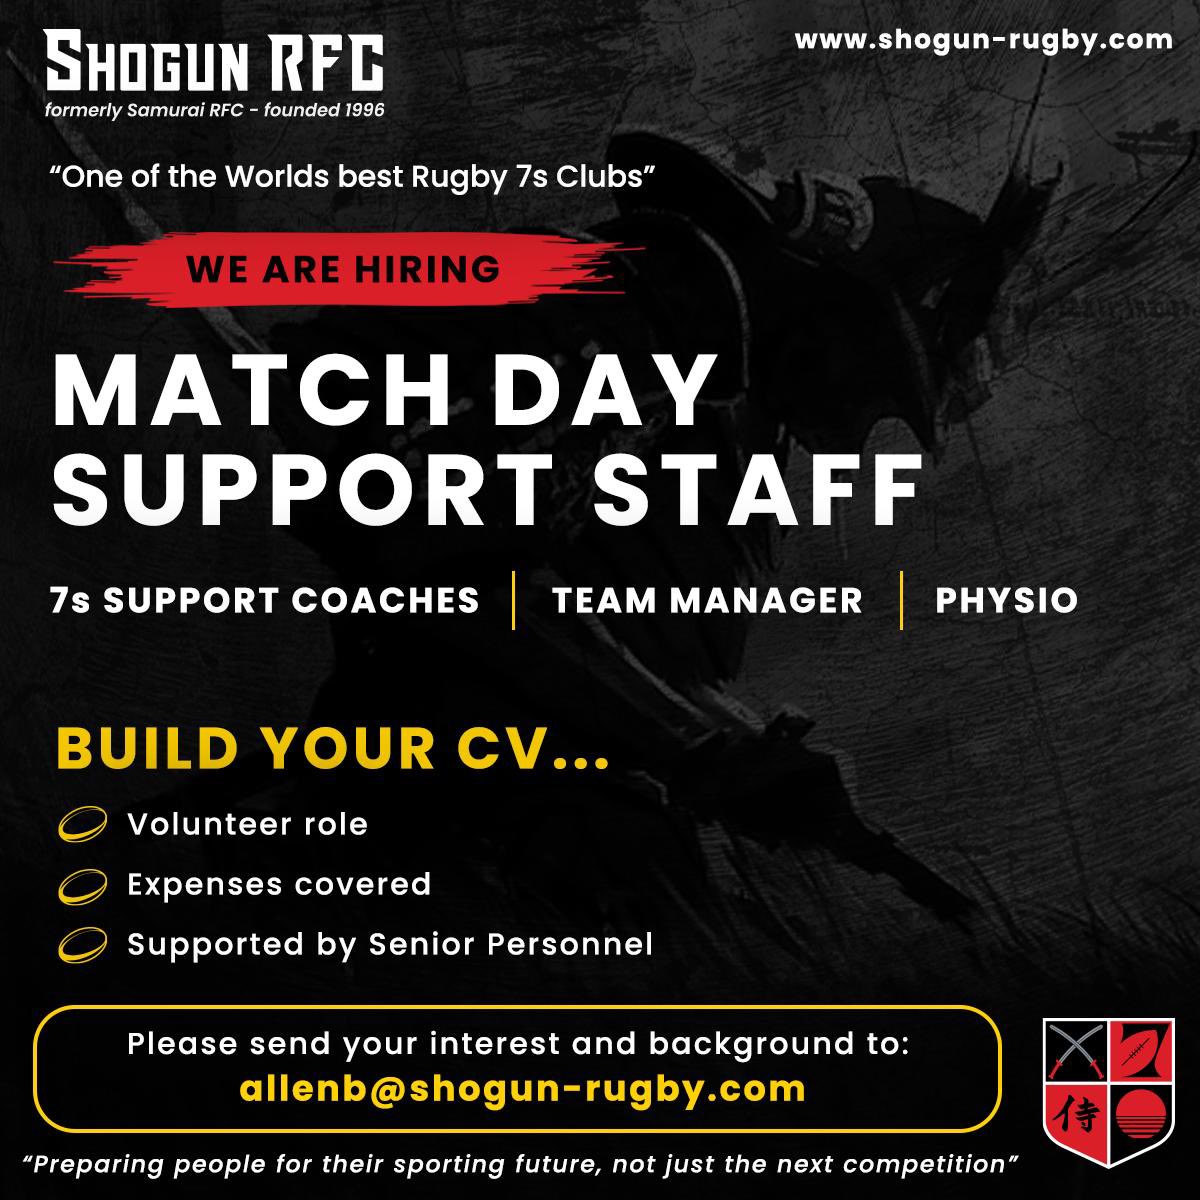 Do you want to join the @ShogunRugby Crew? Great opportunity for you to get involved with the one of the World’s most successful Rugby club.
See posters for more details 
 #ProvenPathway #Development #NewName #SameCoreValues #EndlessPossibilities